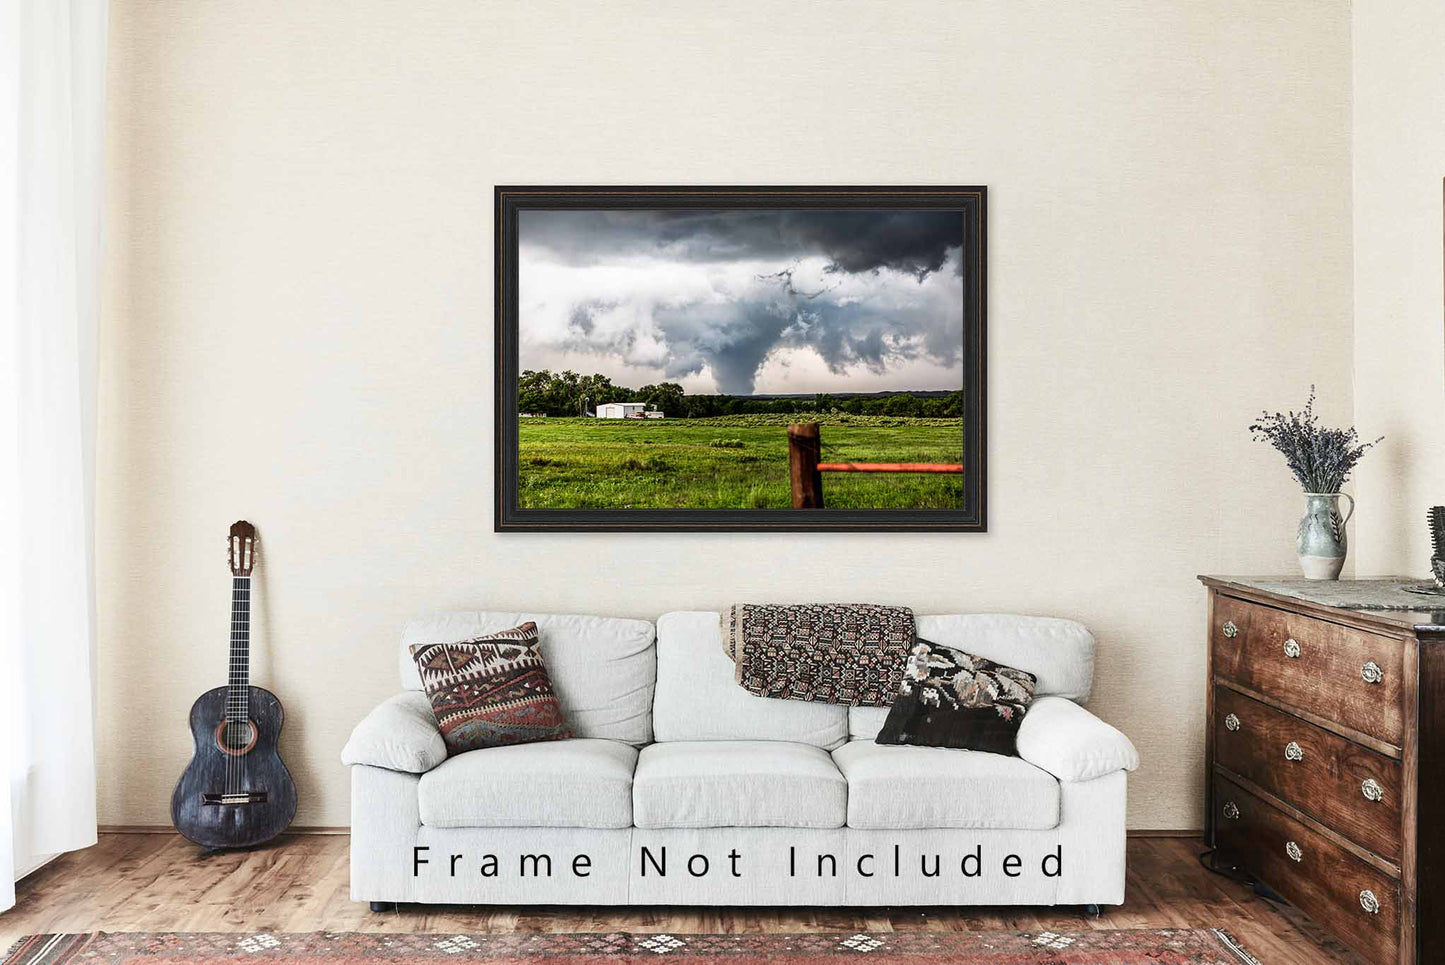 Storm Photography Print - Picture of Large Tornado on Spring Day in Texas Panhandle Thunderstorm Home Decor Weather Wall Art Photo Artwork